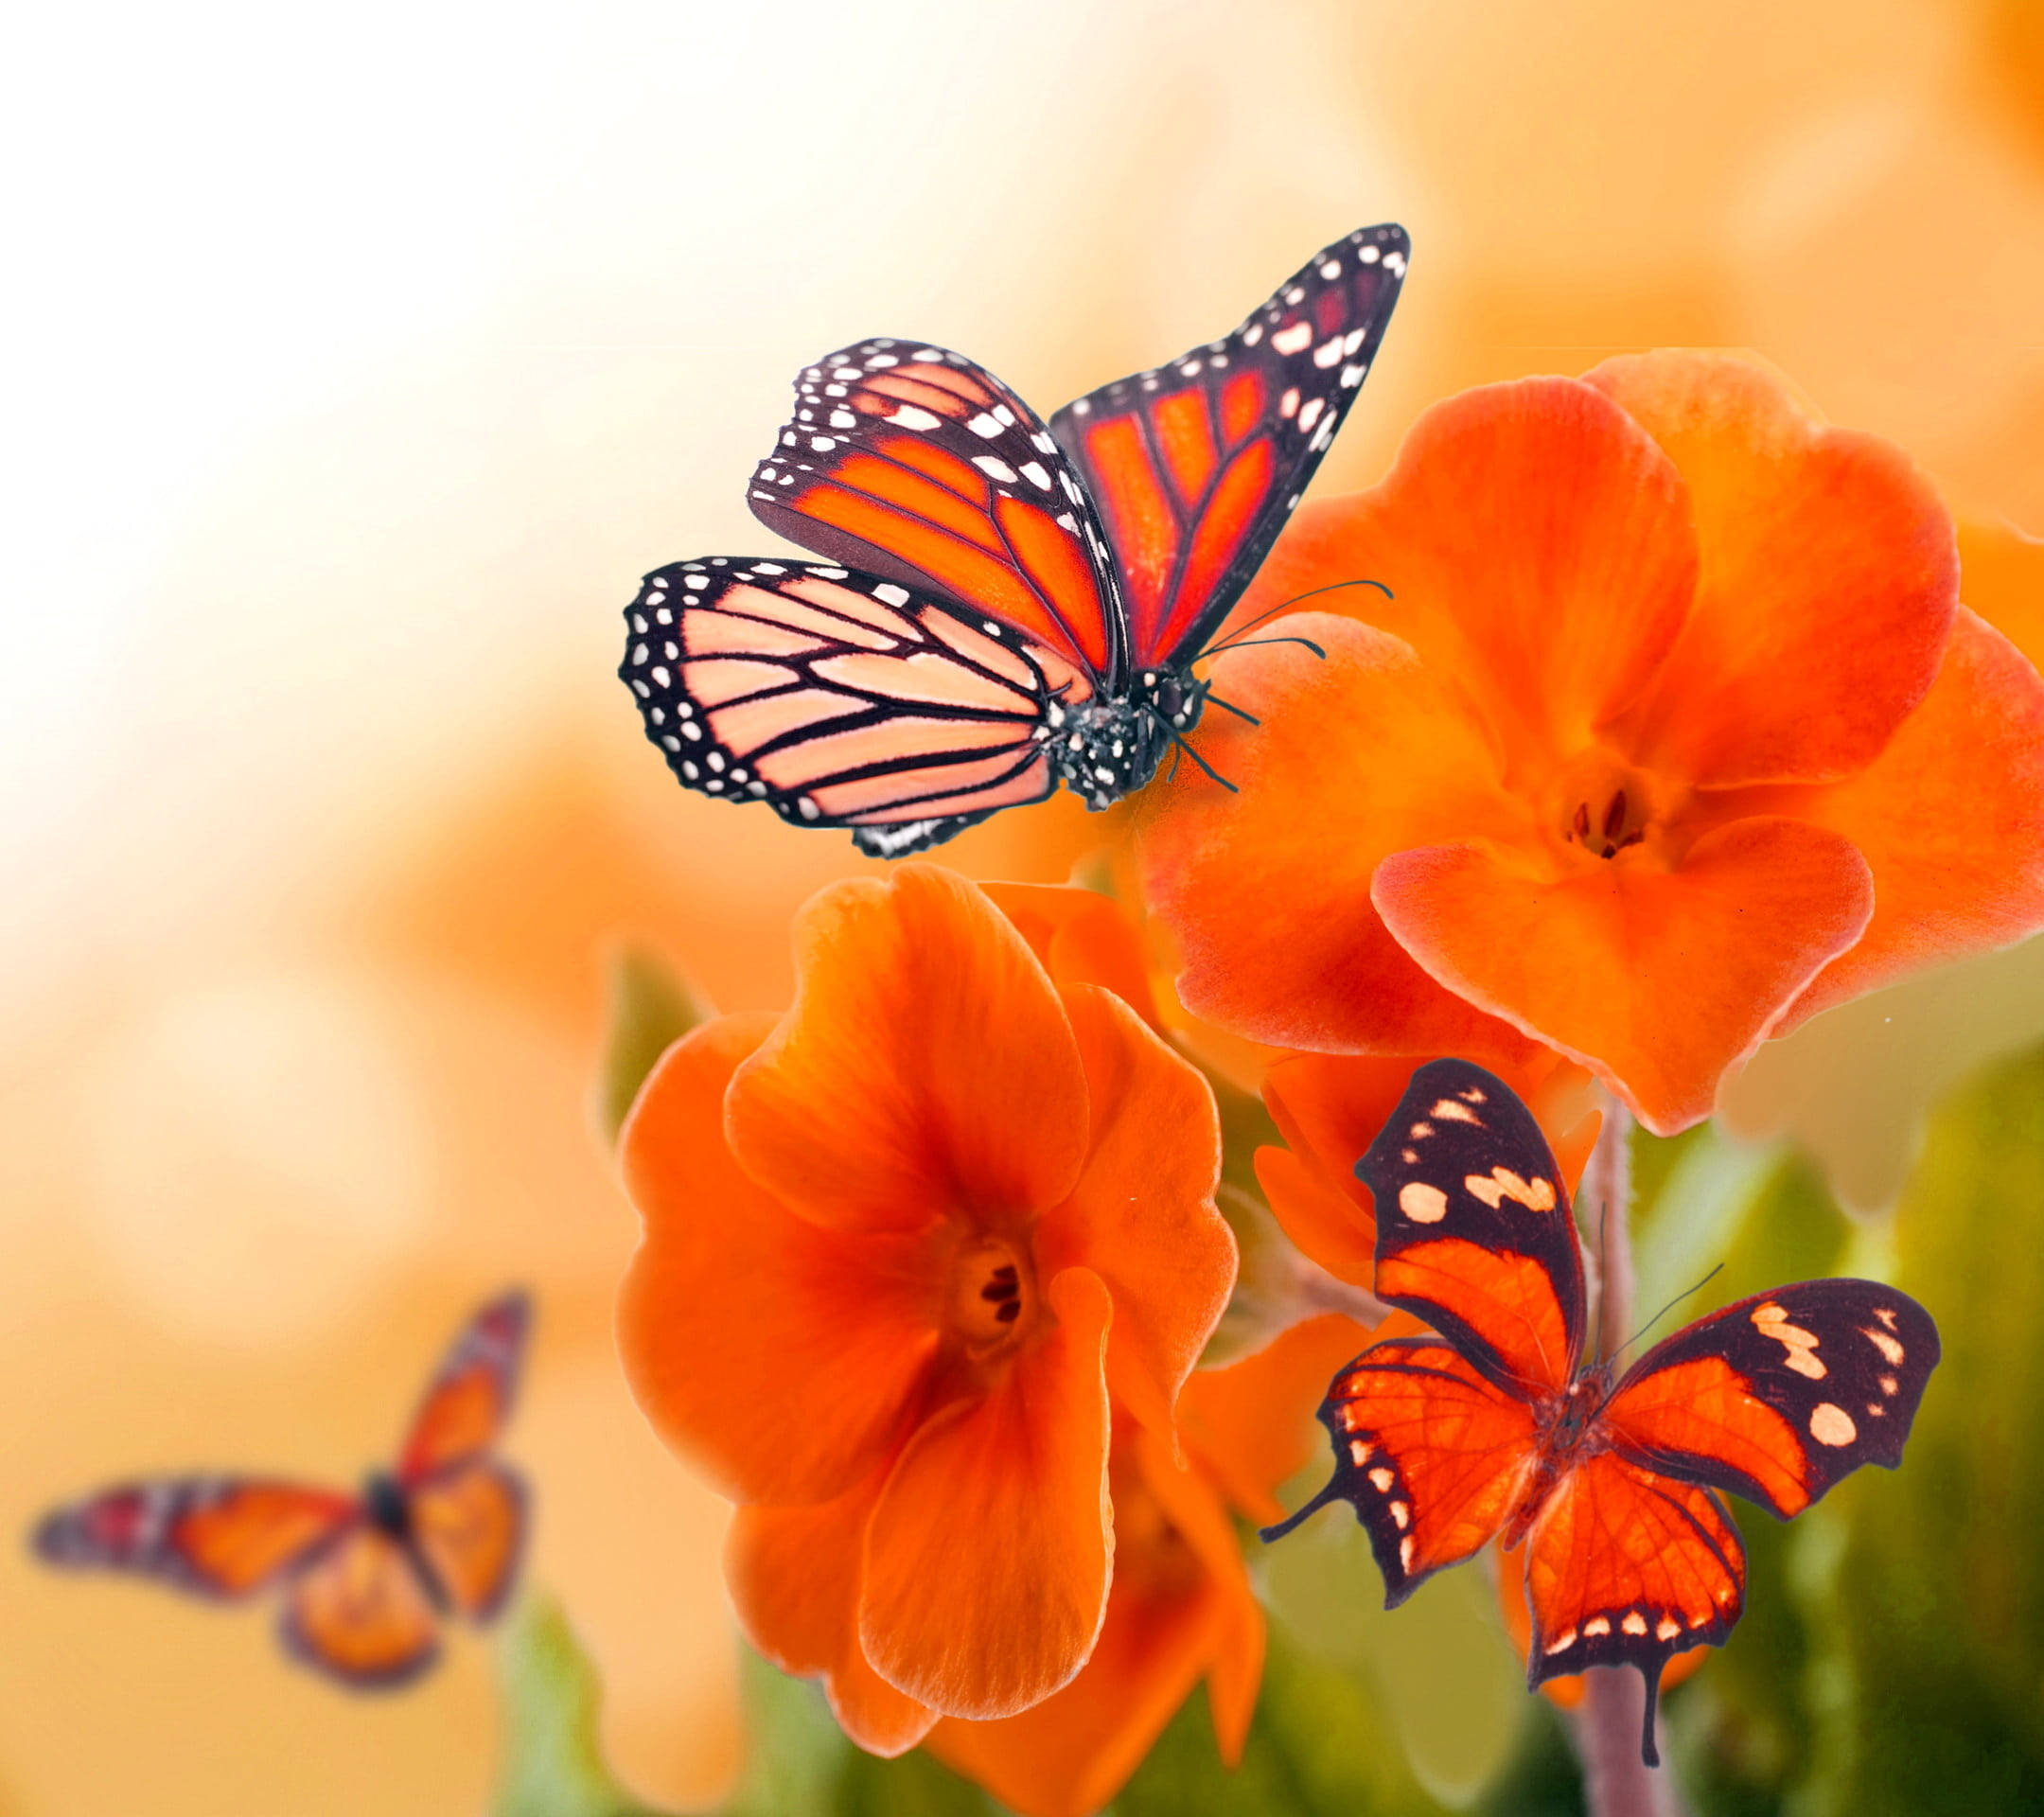 Wallpaper Orange and Black Butterfly Perched on Green Plant Background   Download Free Image